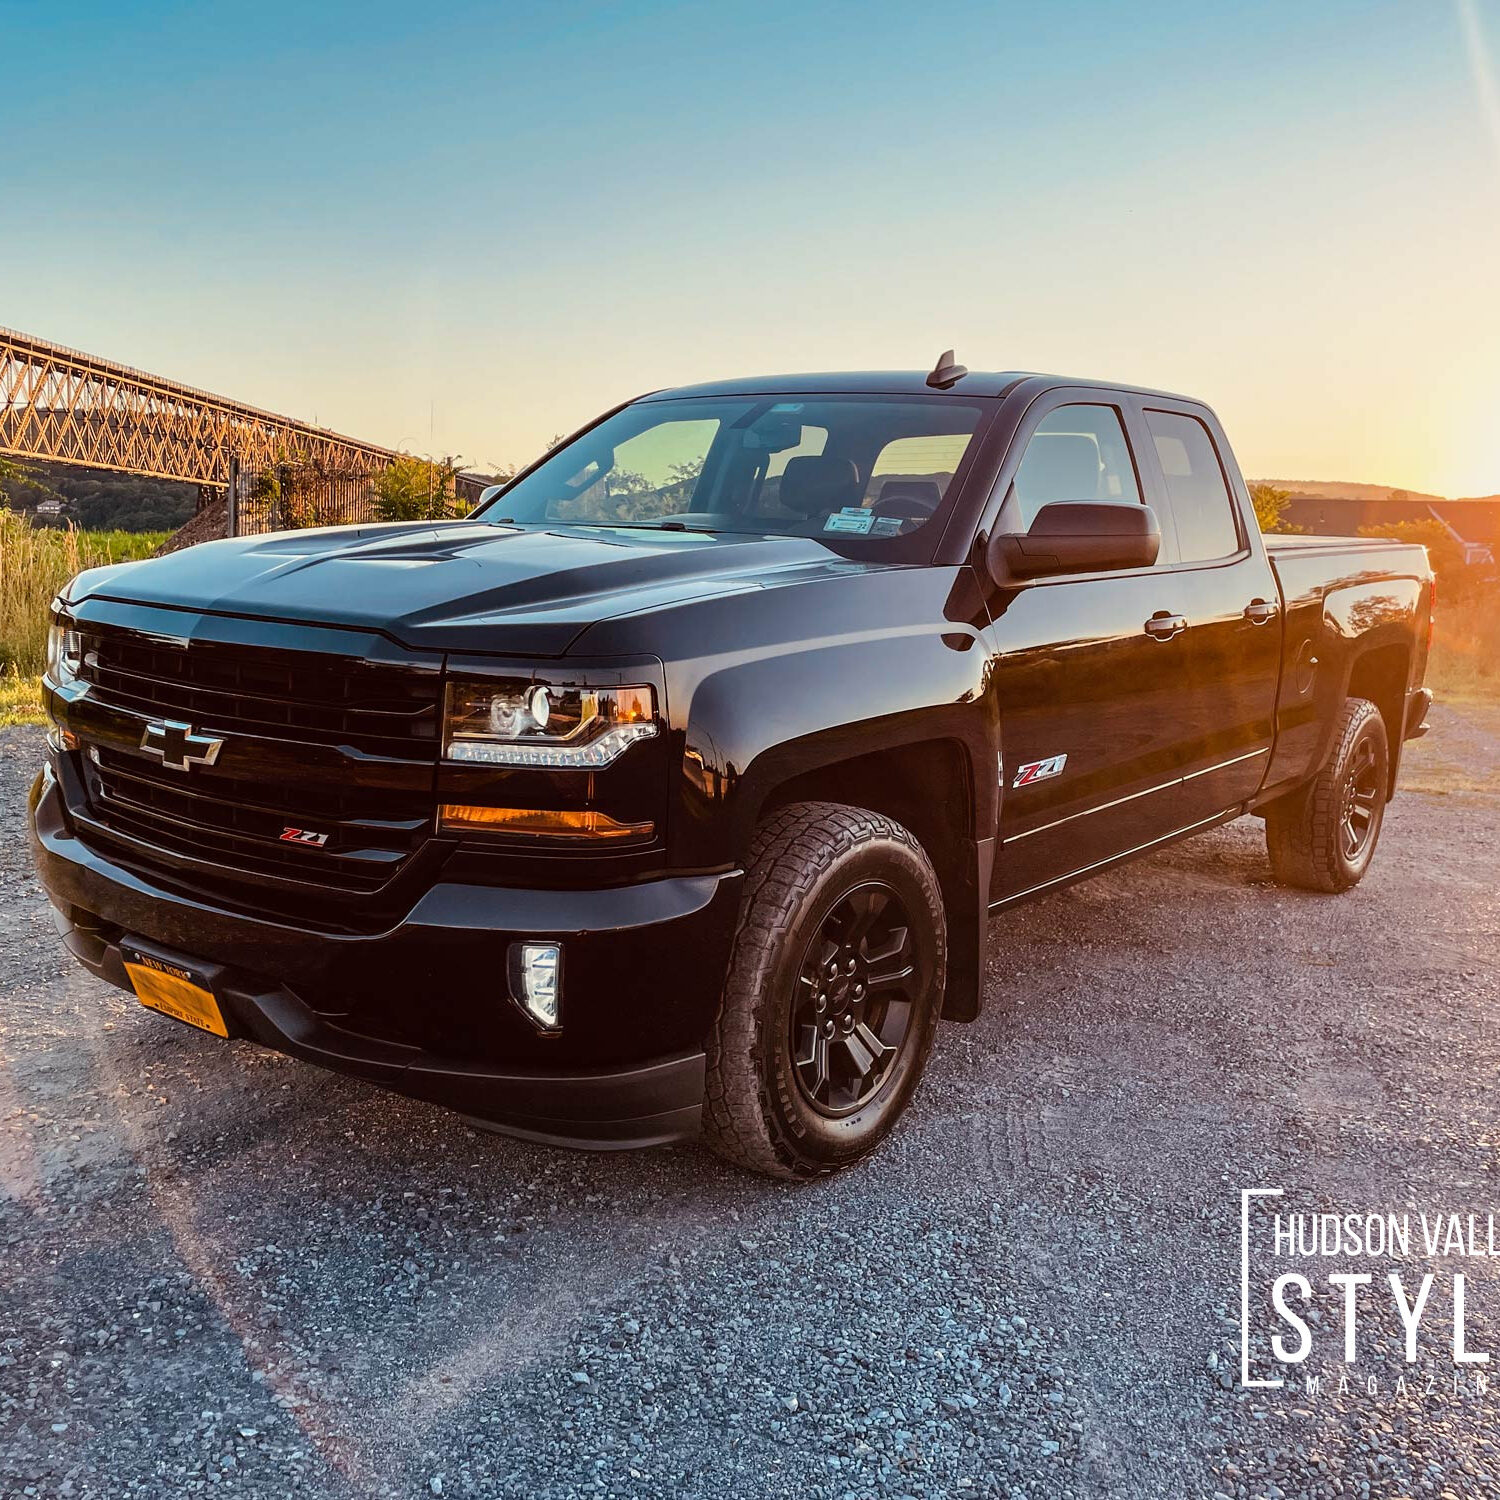 How to Rent a Chevy Silverado Truck and Explore Hudson Valley in Style with Alluvion GO! Hudson Valley Car Rentals